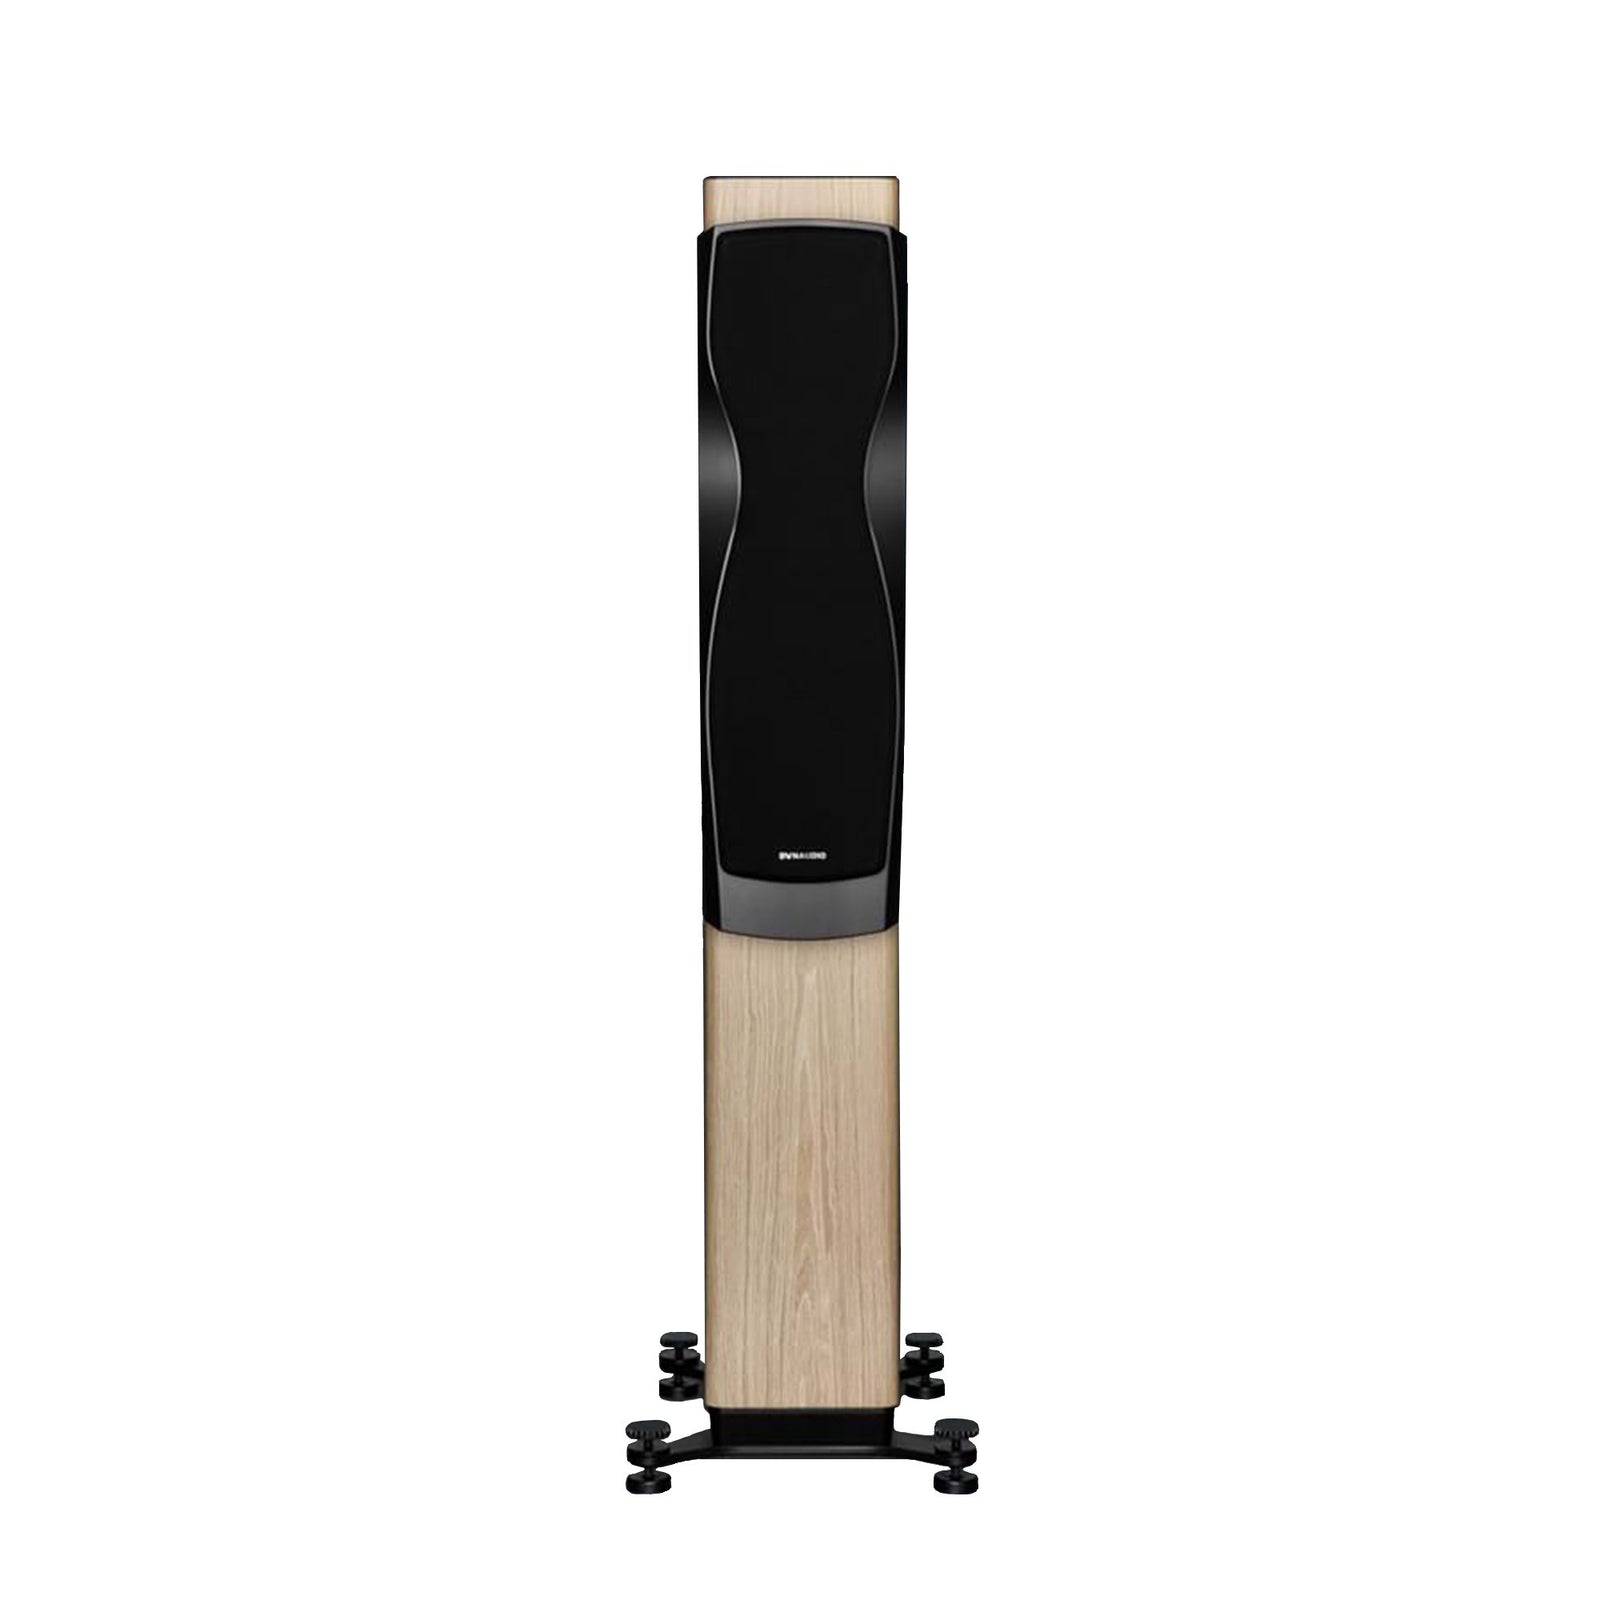 Confidence 30 speaker in Blonde wood with grill